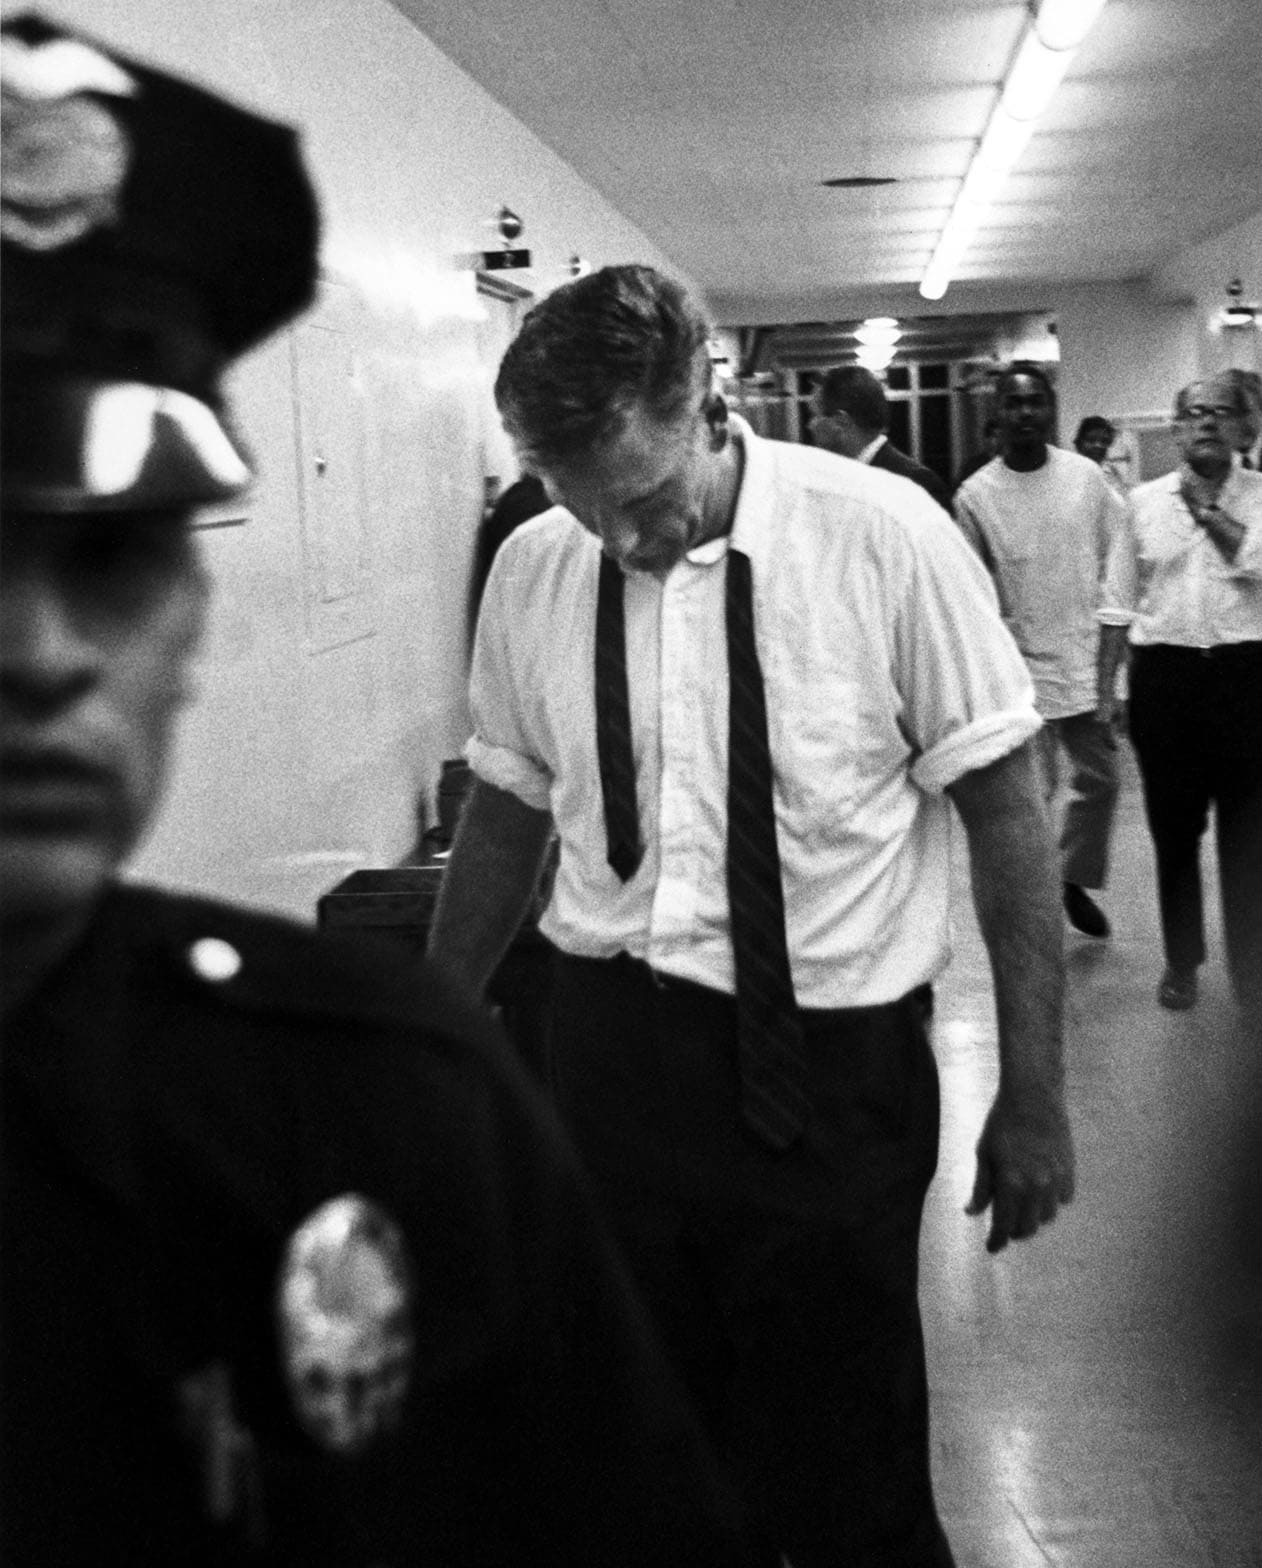 Kennedy bodyguard Bill Barry at hospital after shooting